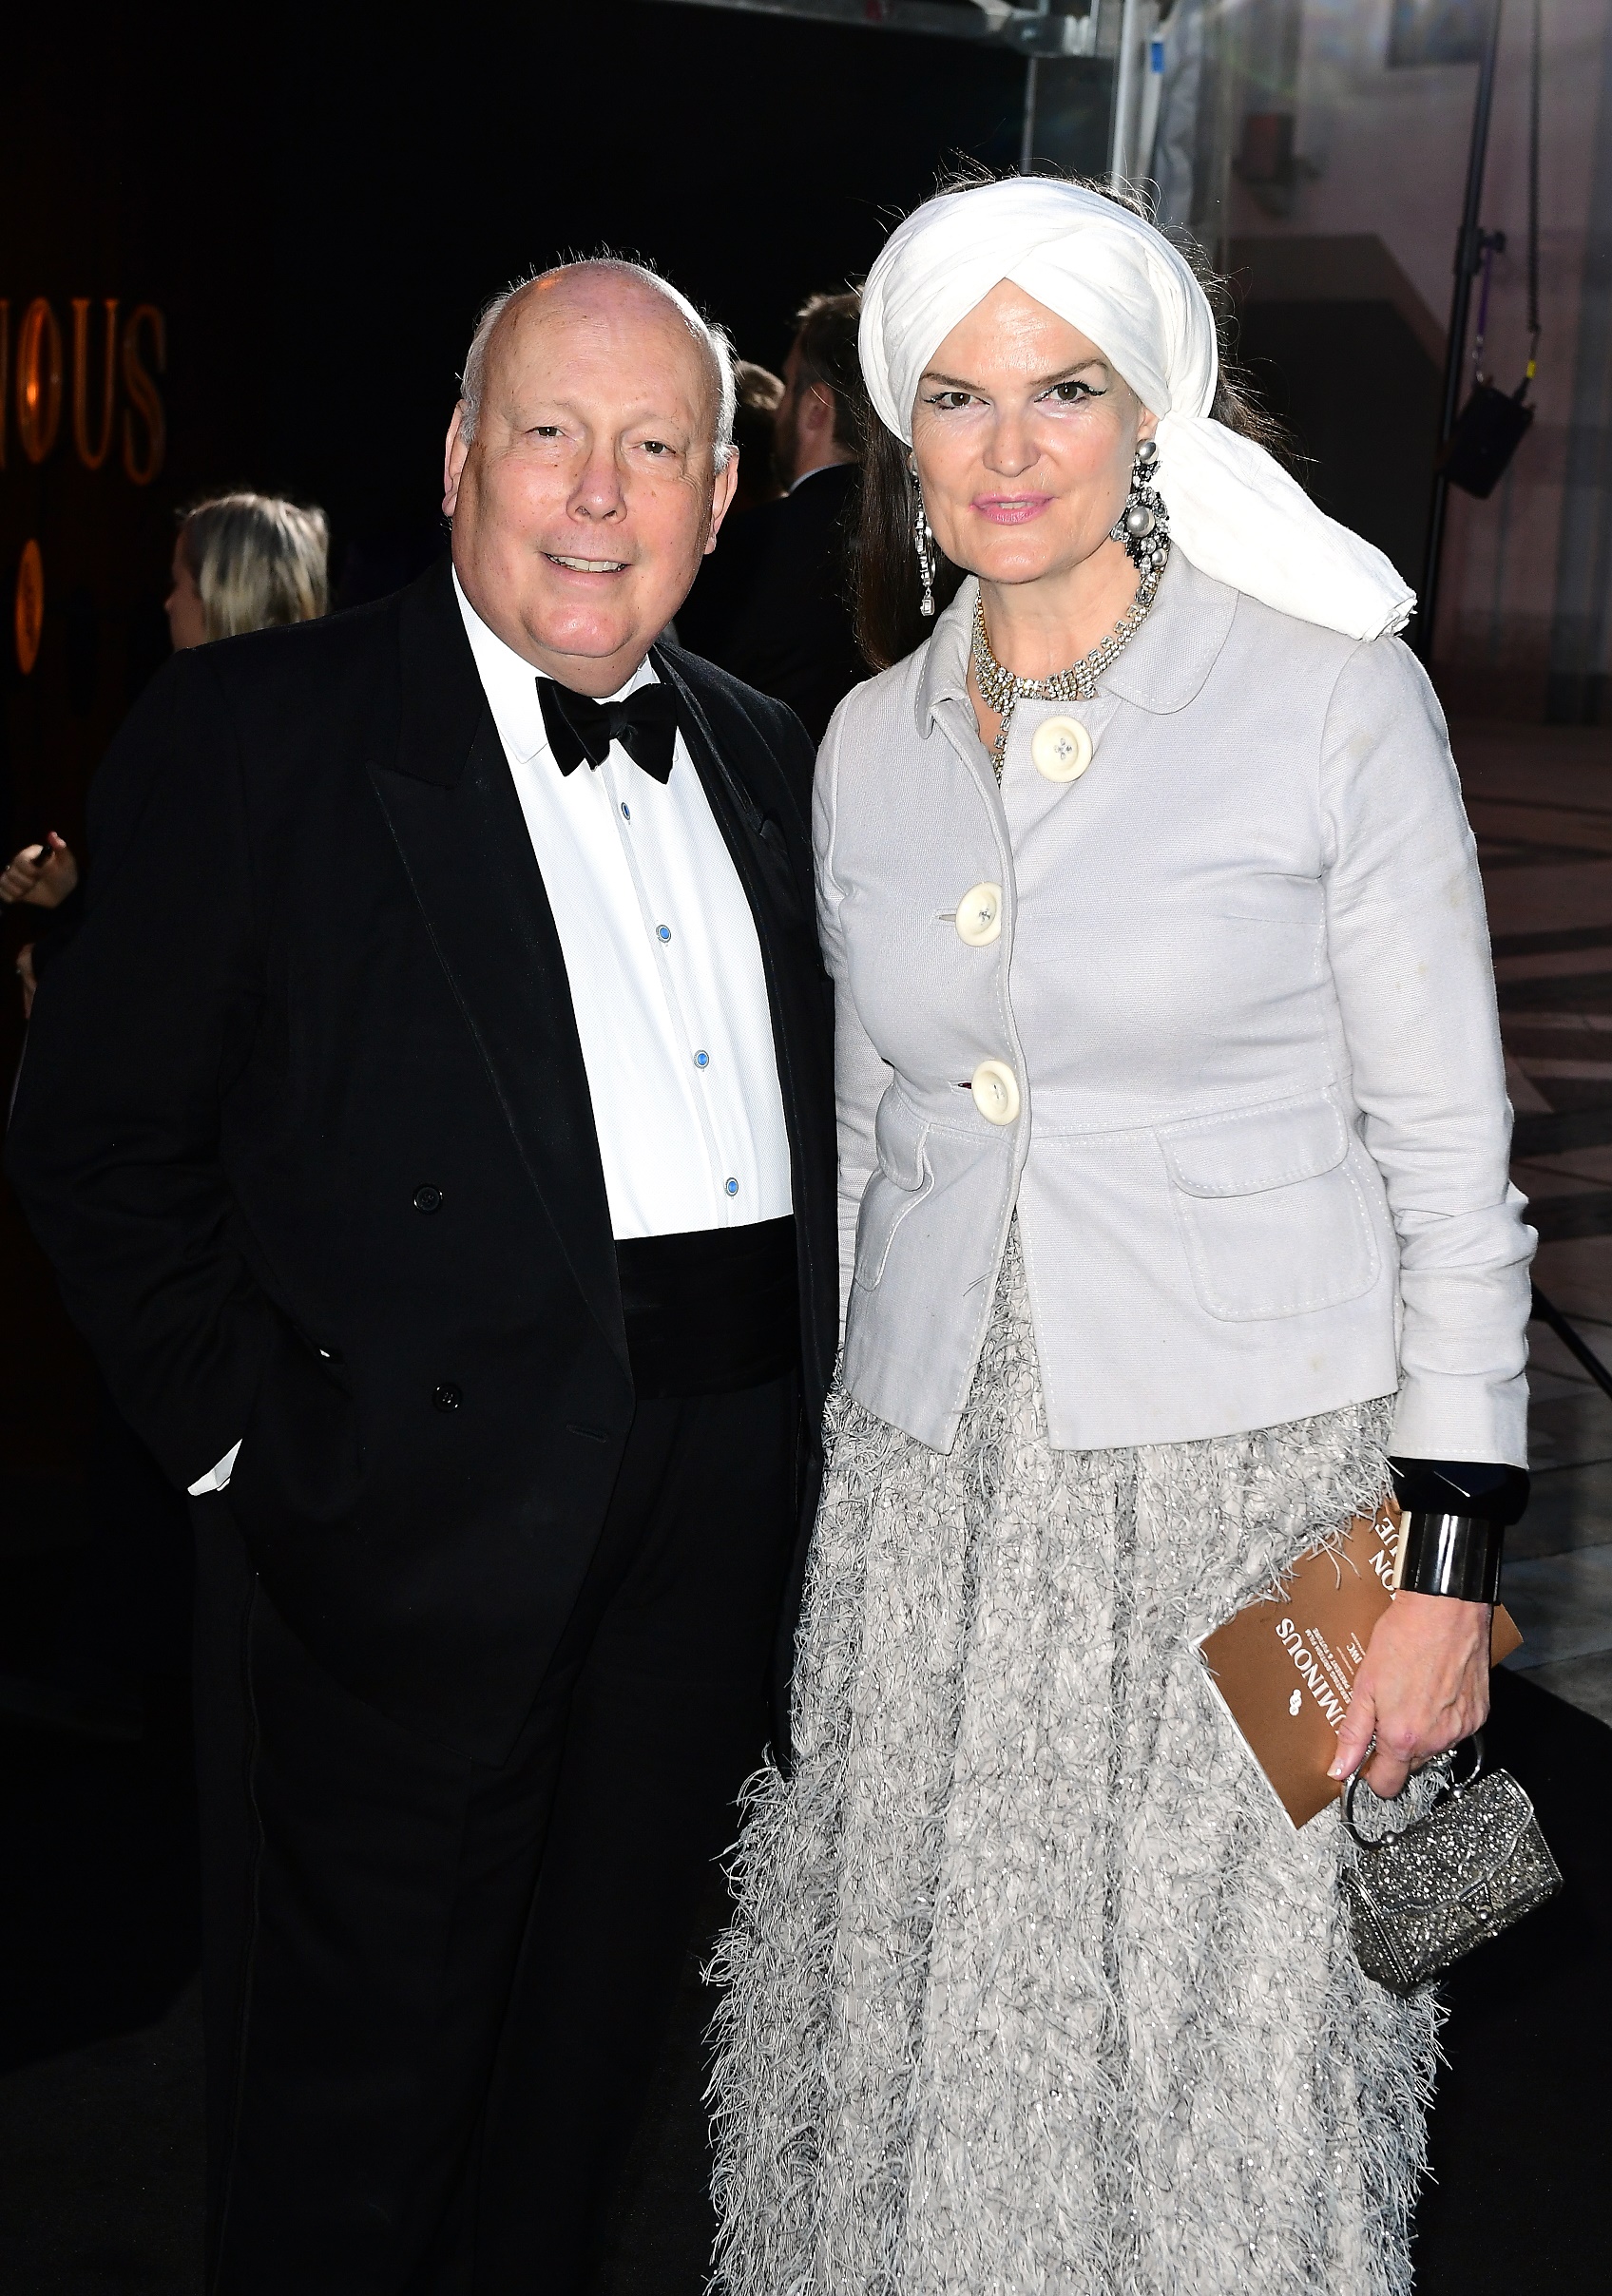 Lord and Lady Fellowes attending the BFI Luminous Fundraising Gala